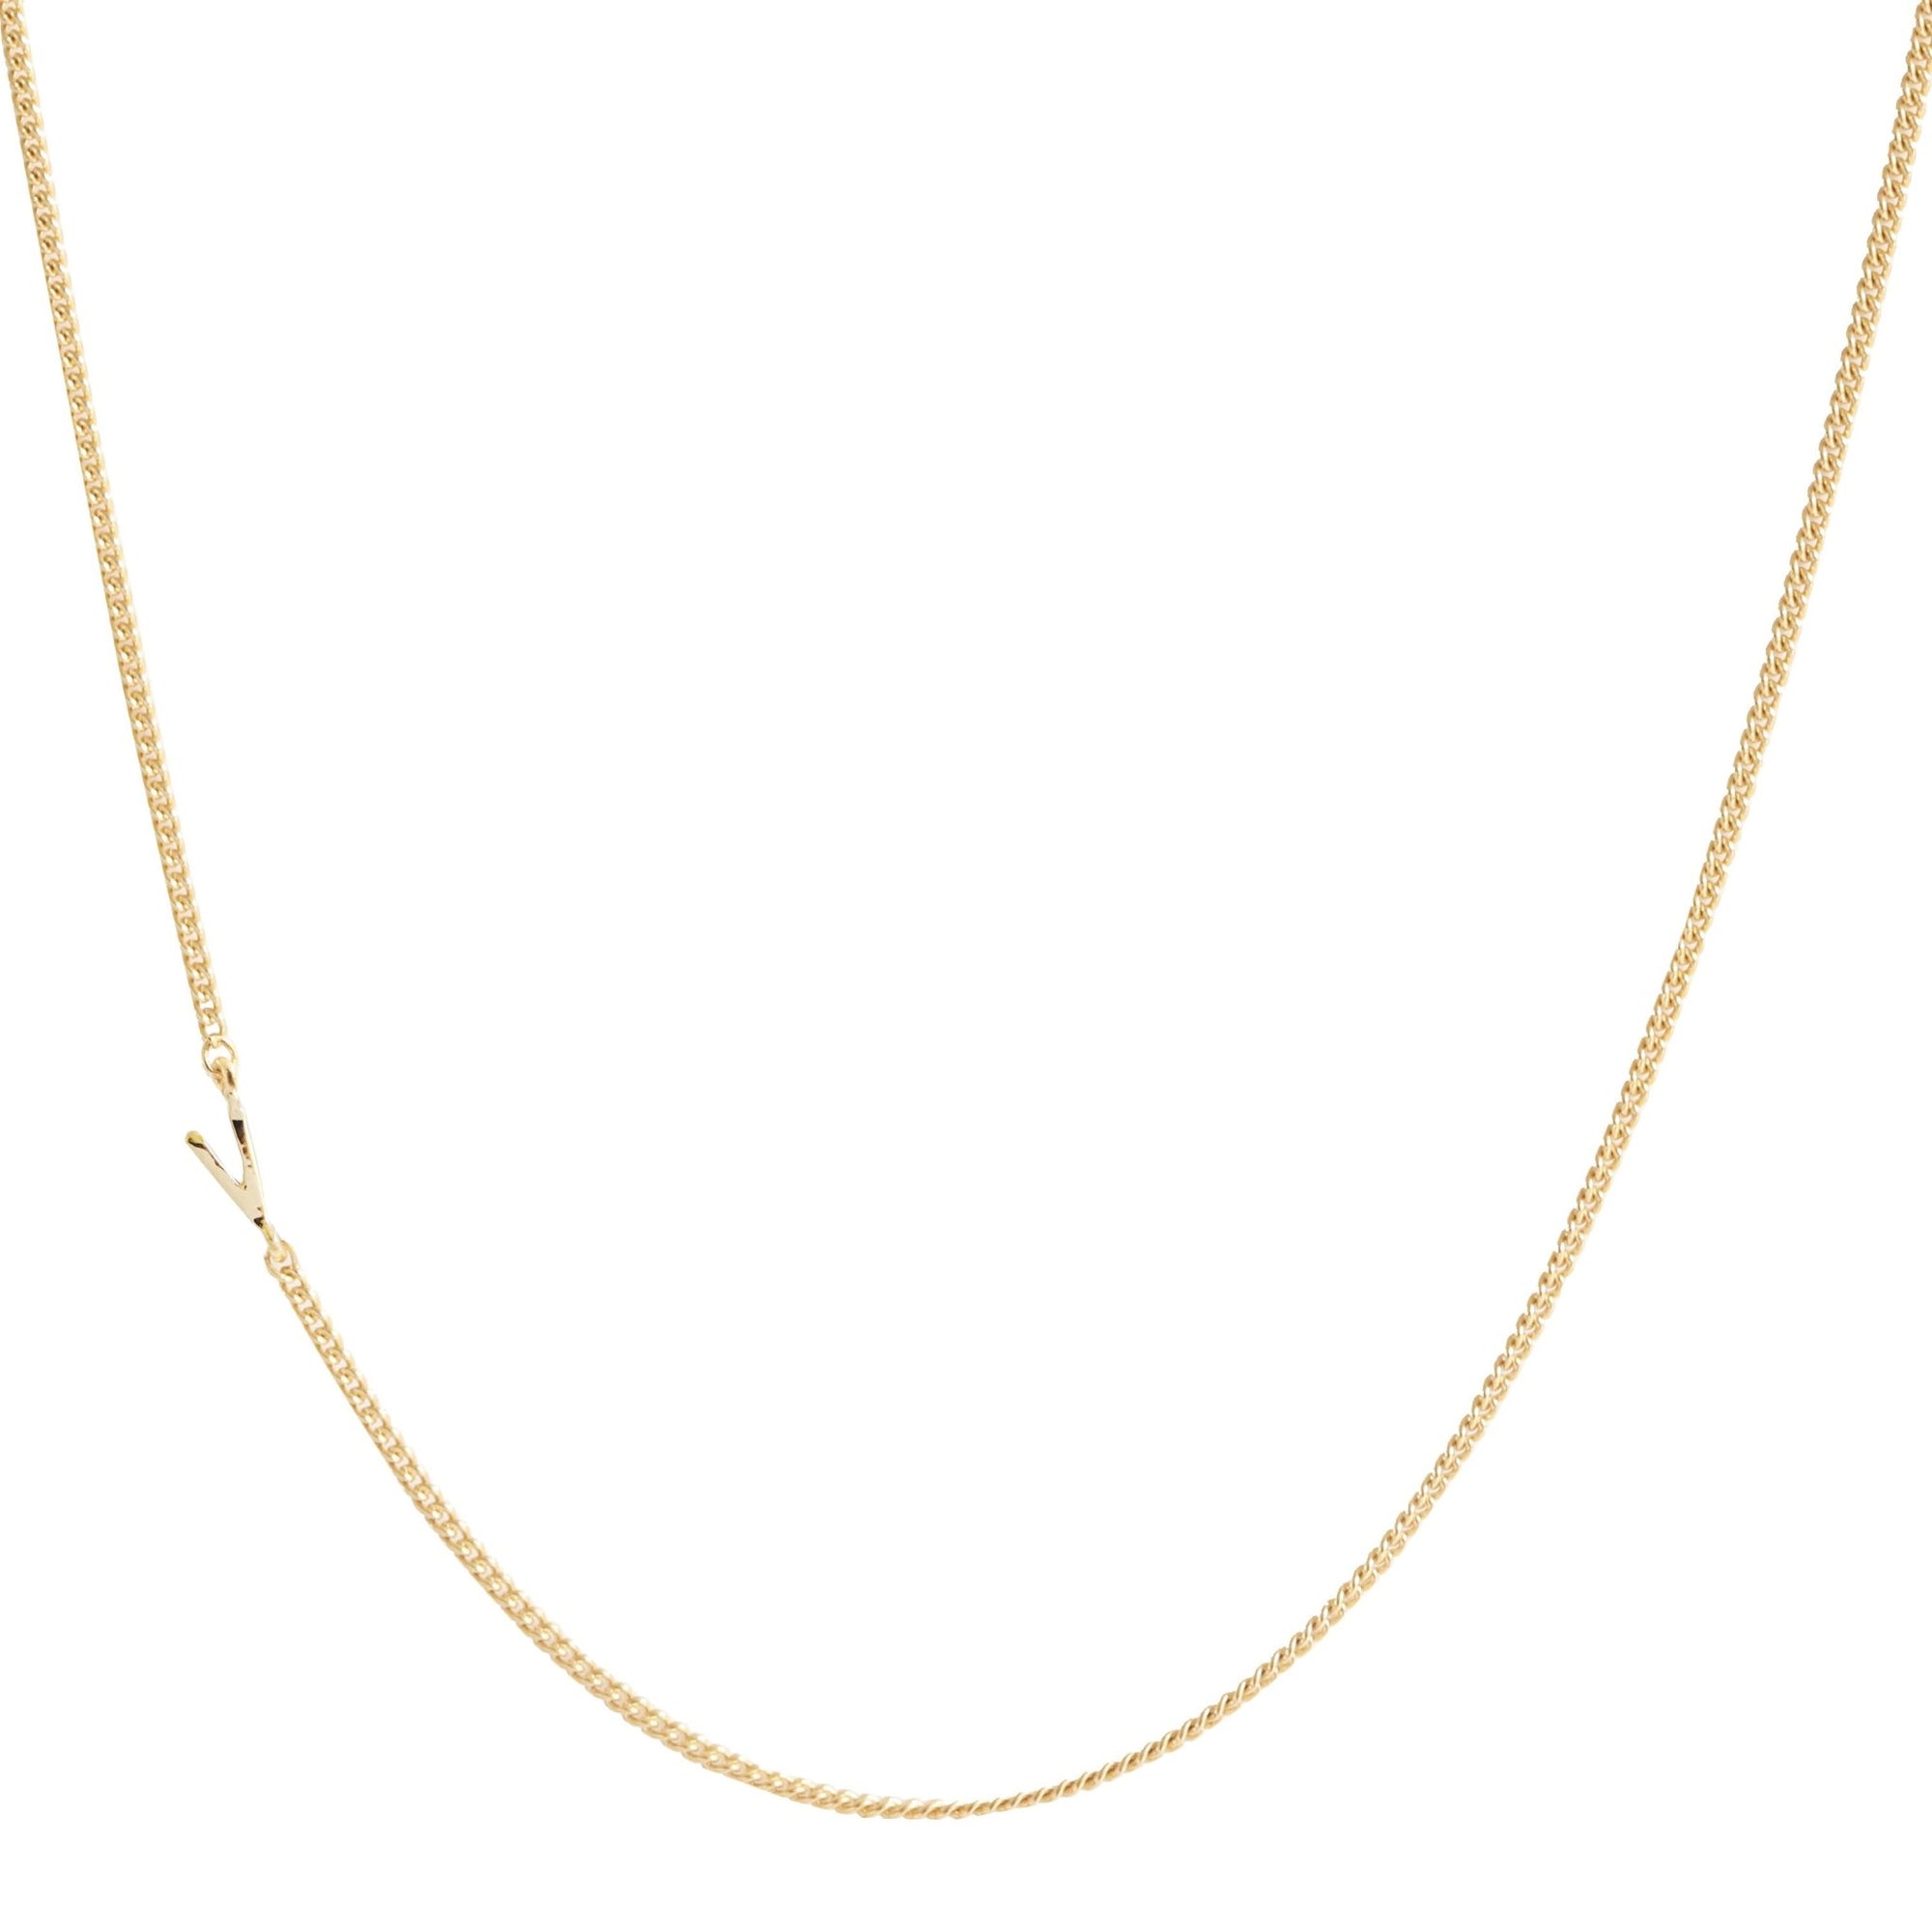 NOTABLE OFFSET INITIAL NECKLACE - V - GOLD - SO PRETTY CARA COTTER